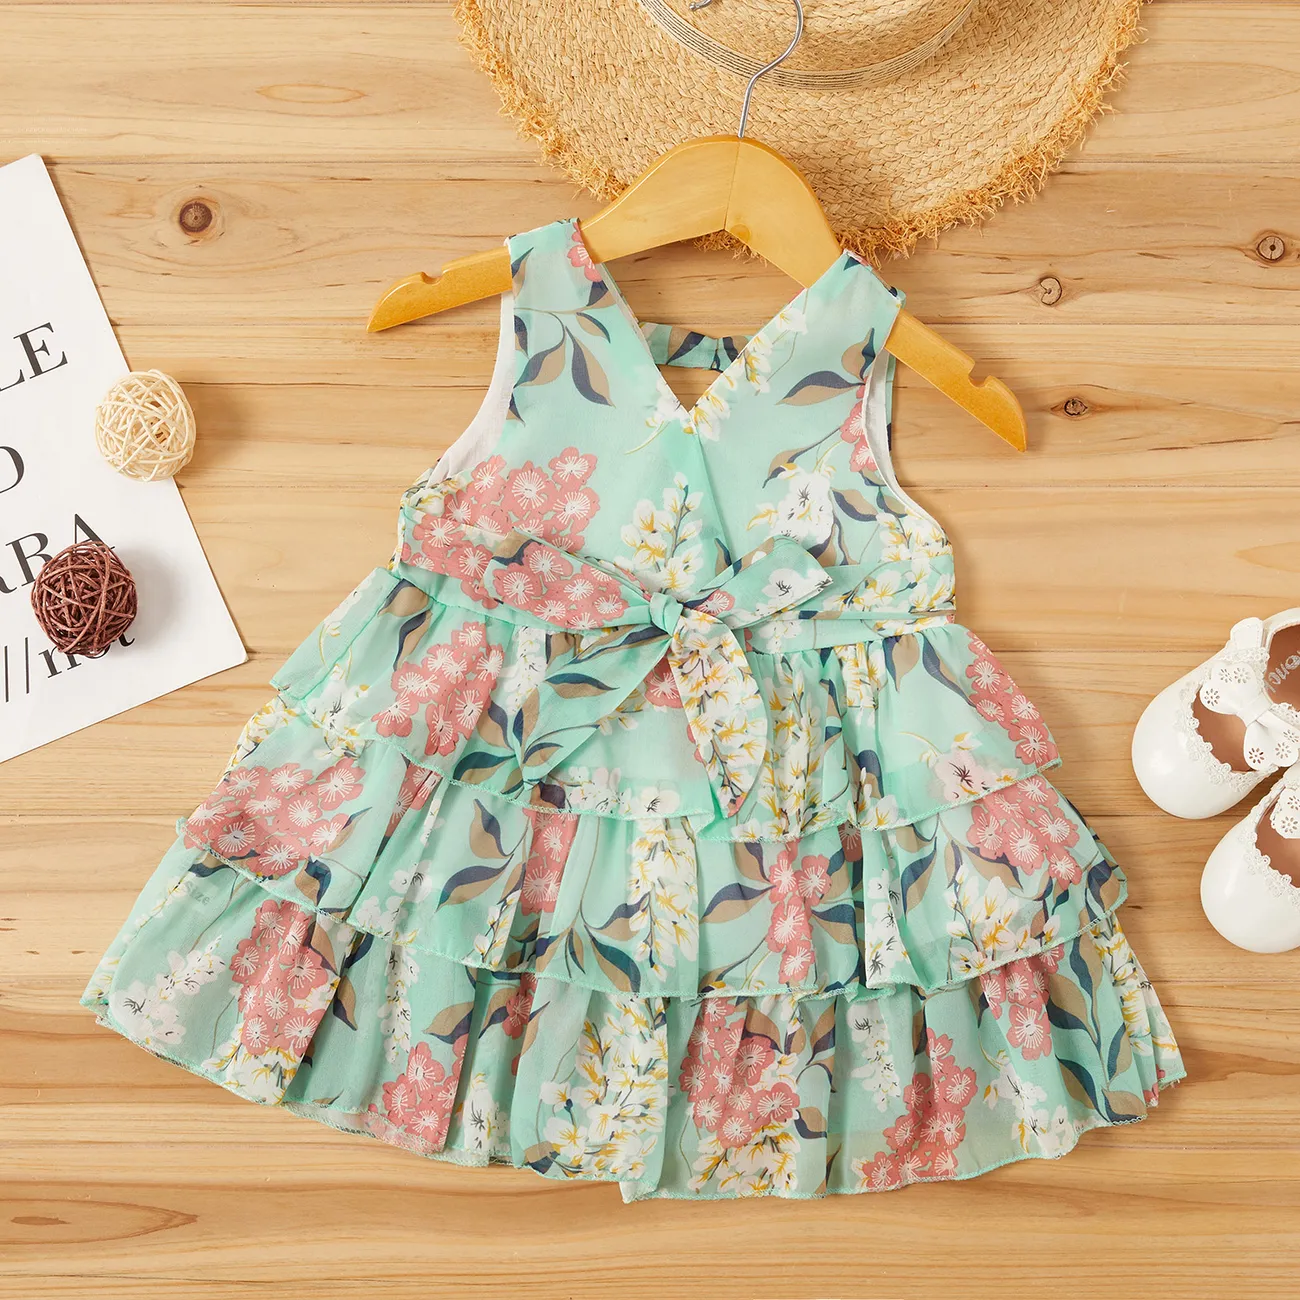 Baby / Toddler Girl Pretty Floral Print Layered Dresses Only $14.99 ...